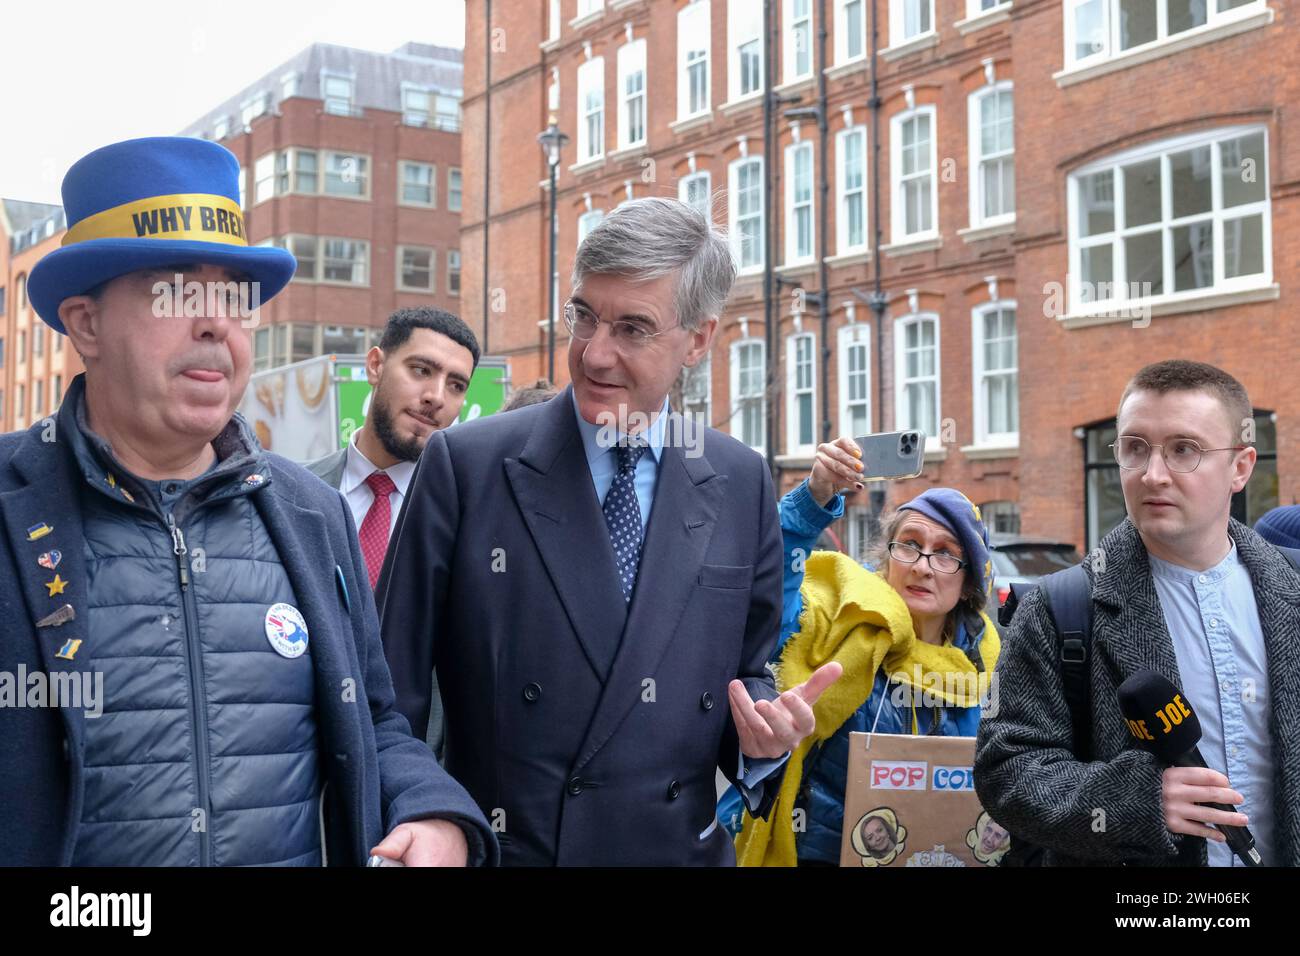 London, UK, 6th February, 2024. Jacob Rees-Mogg leaves the Emmanuel Centre after attending the Popular Conservatism launch event. The former Cabinet Minister debates with anti-Brexit activist Steve Bray. Credit: Eleventh Hour Photography/Alamy Live News Stock Photo